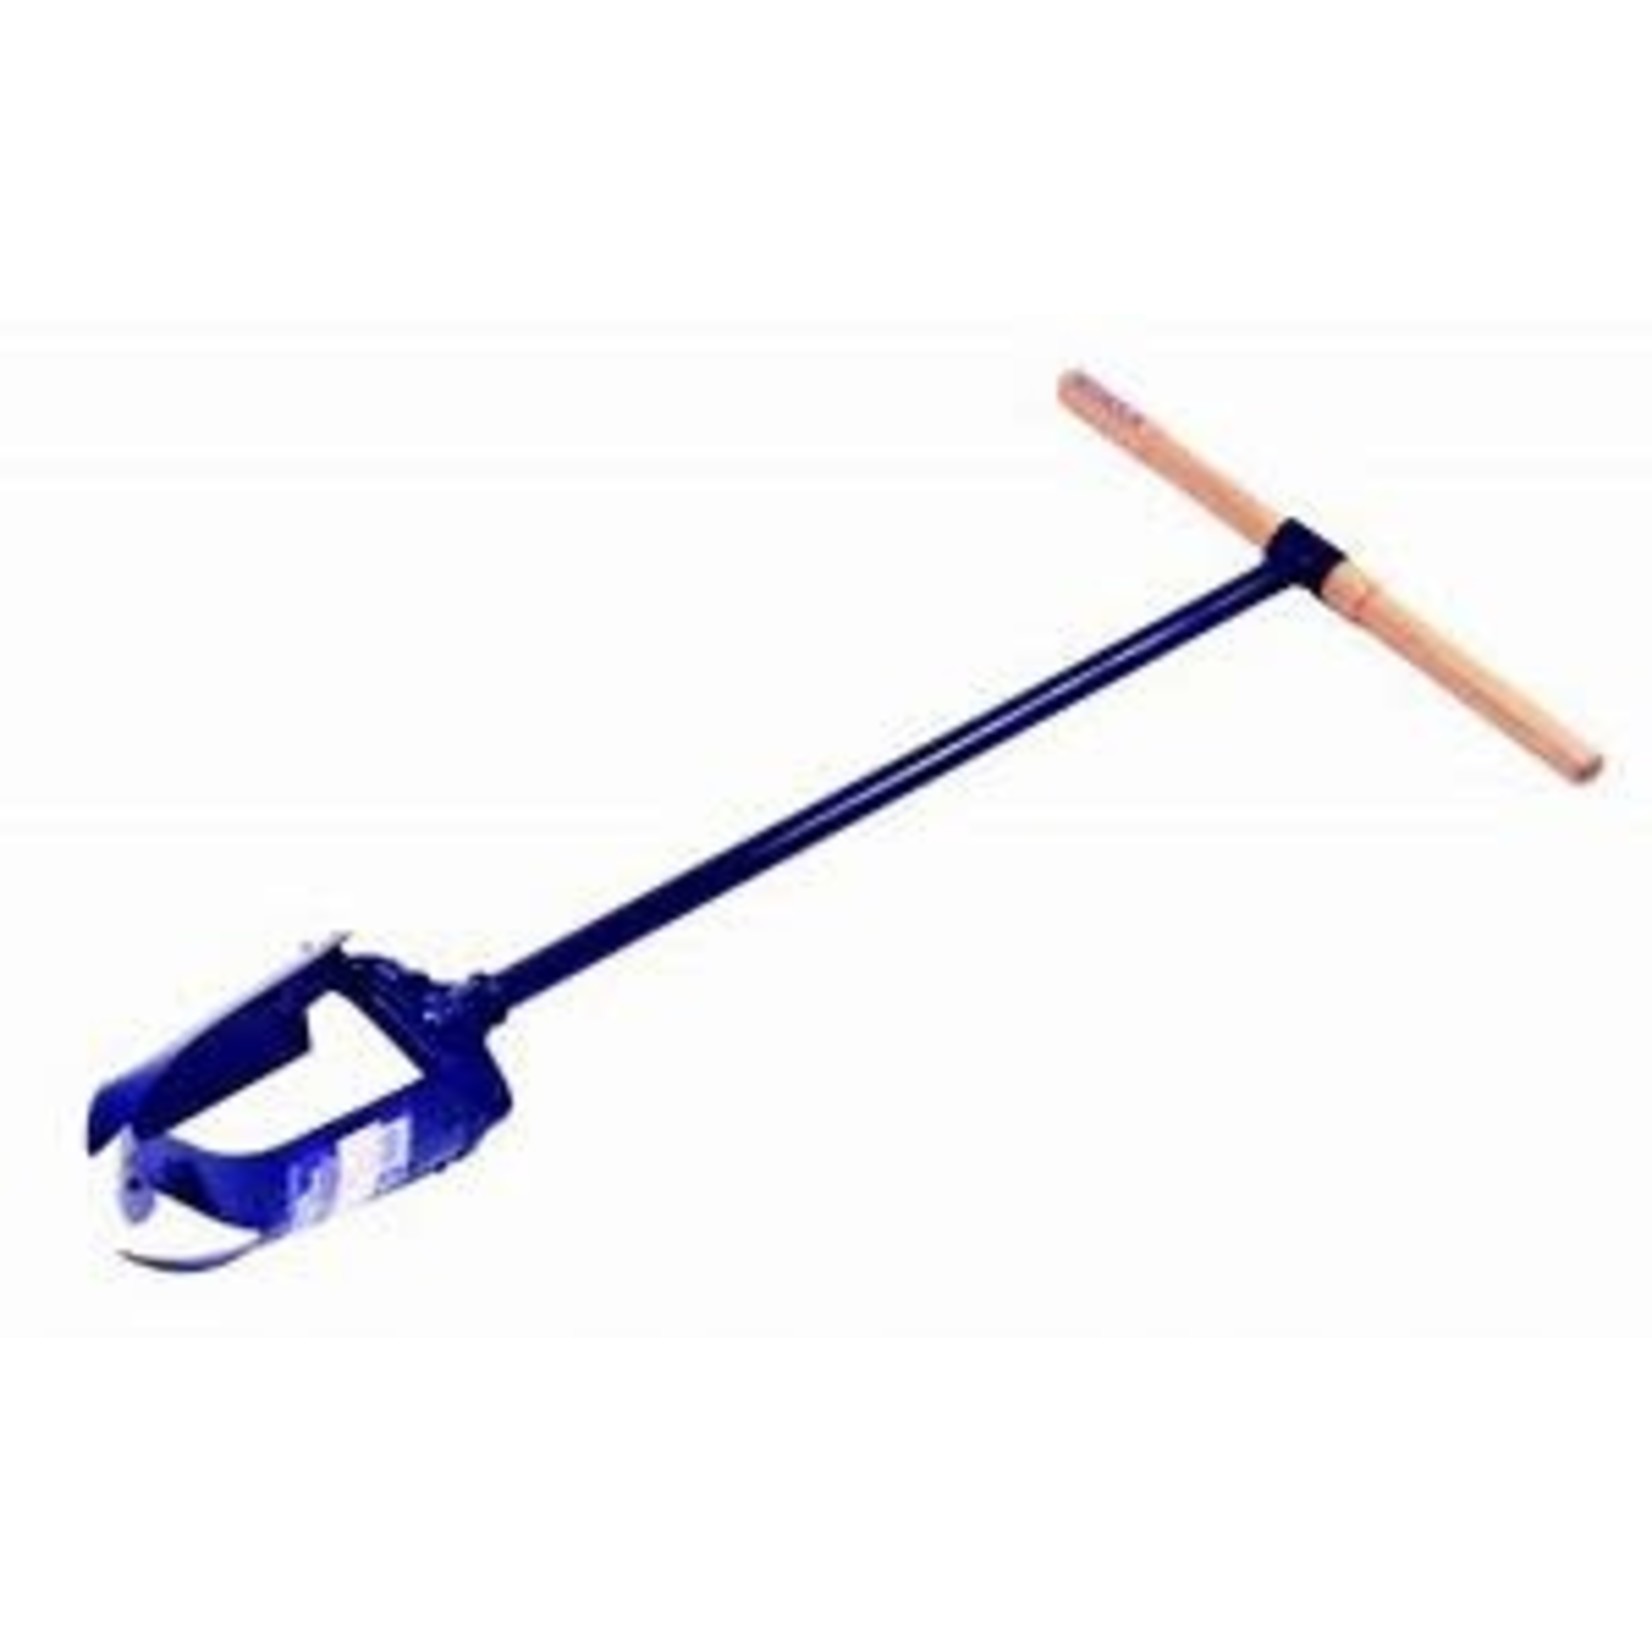 HAND POST HOLE AUGER